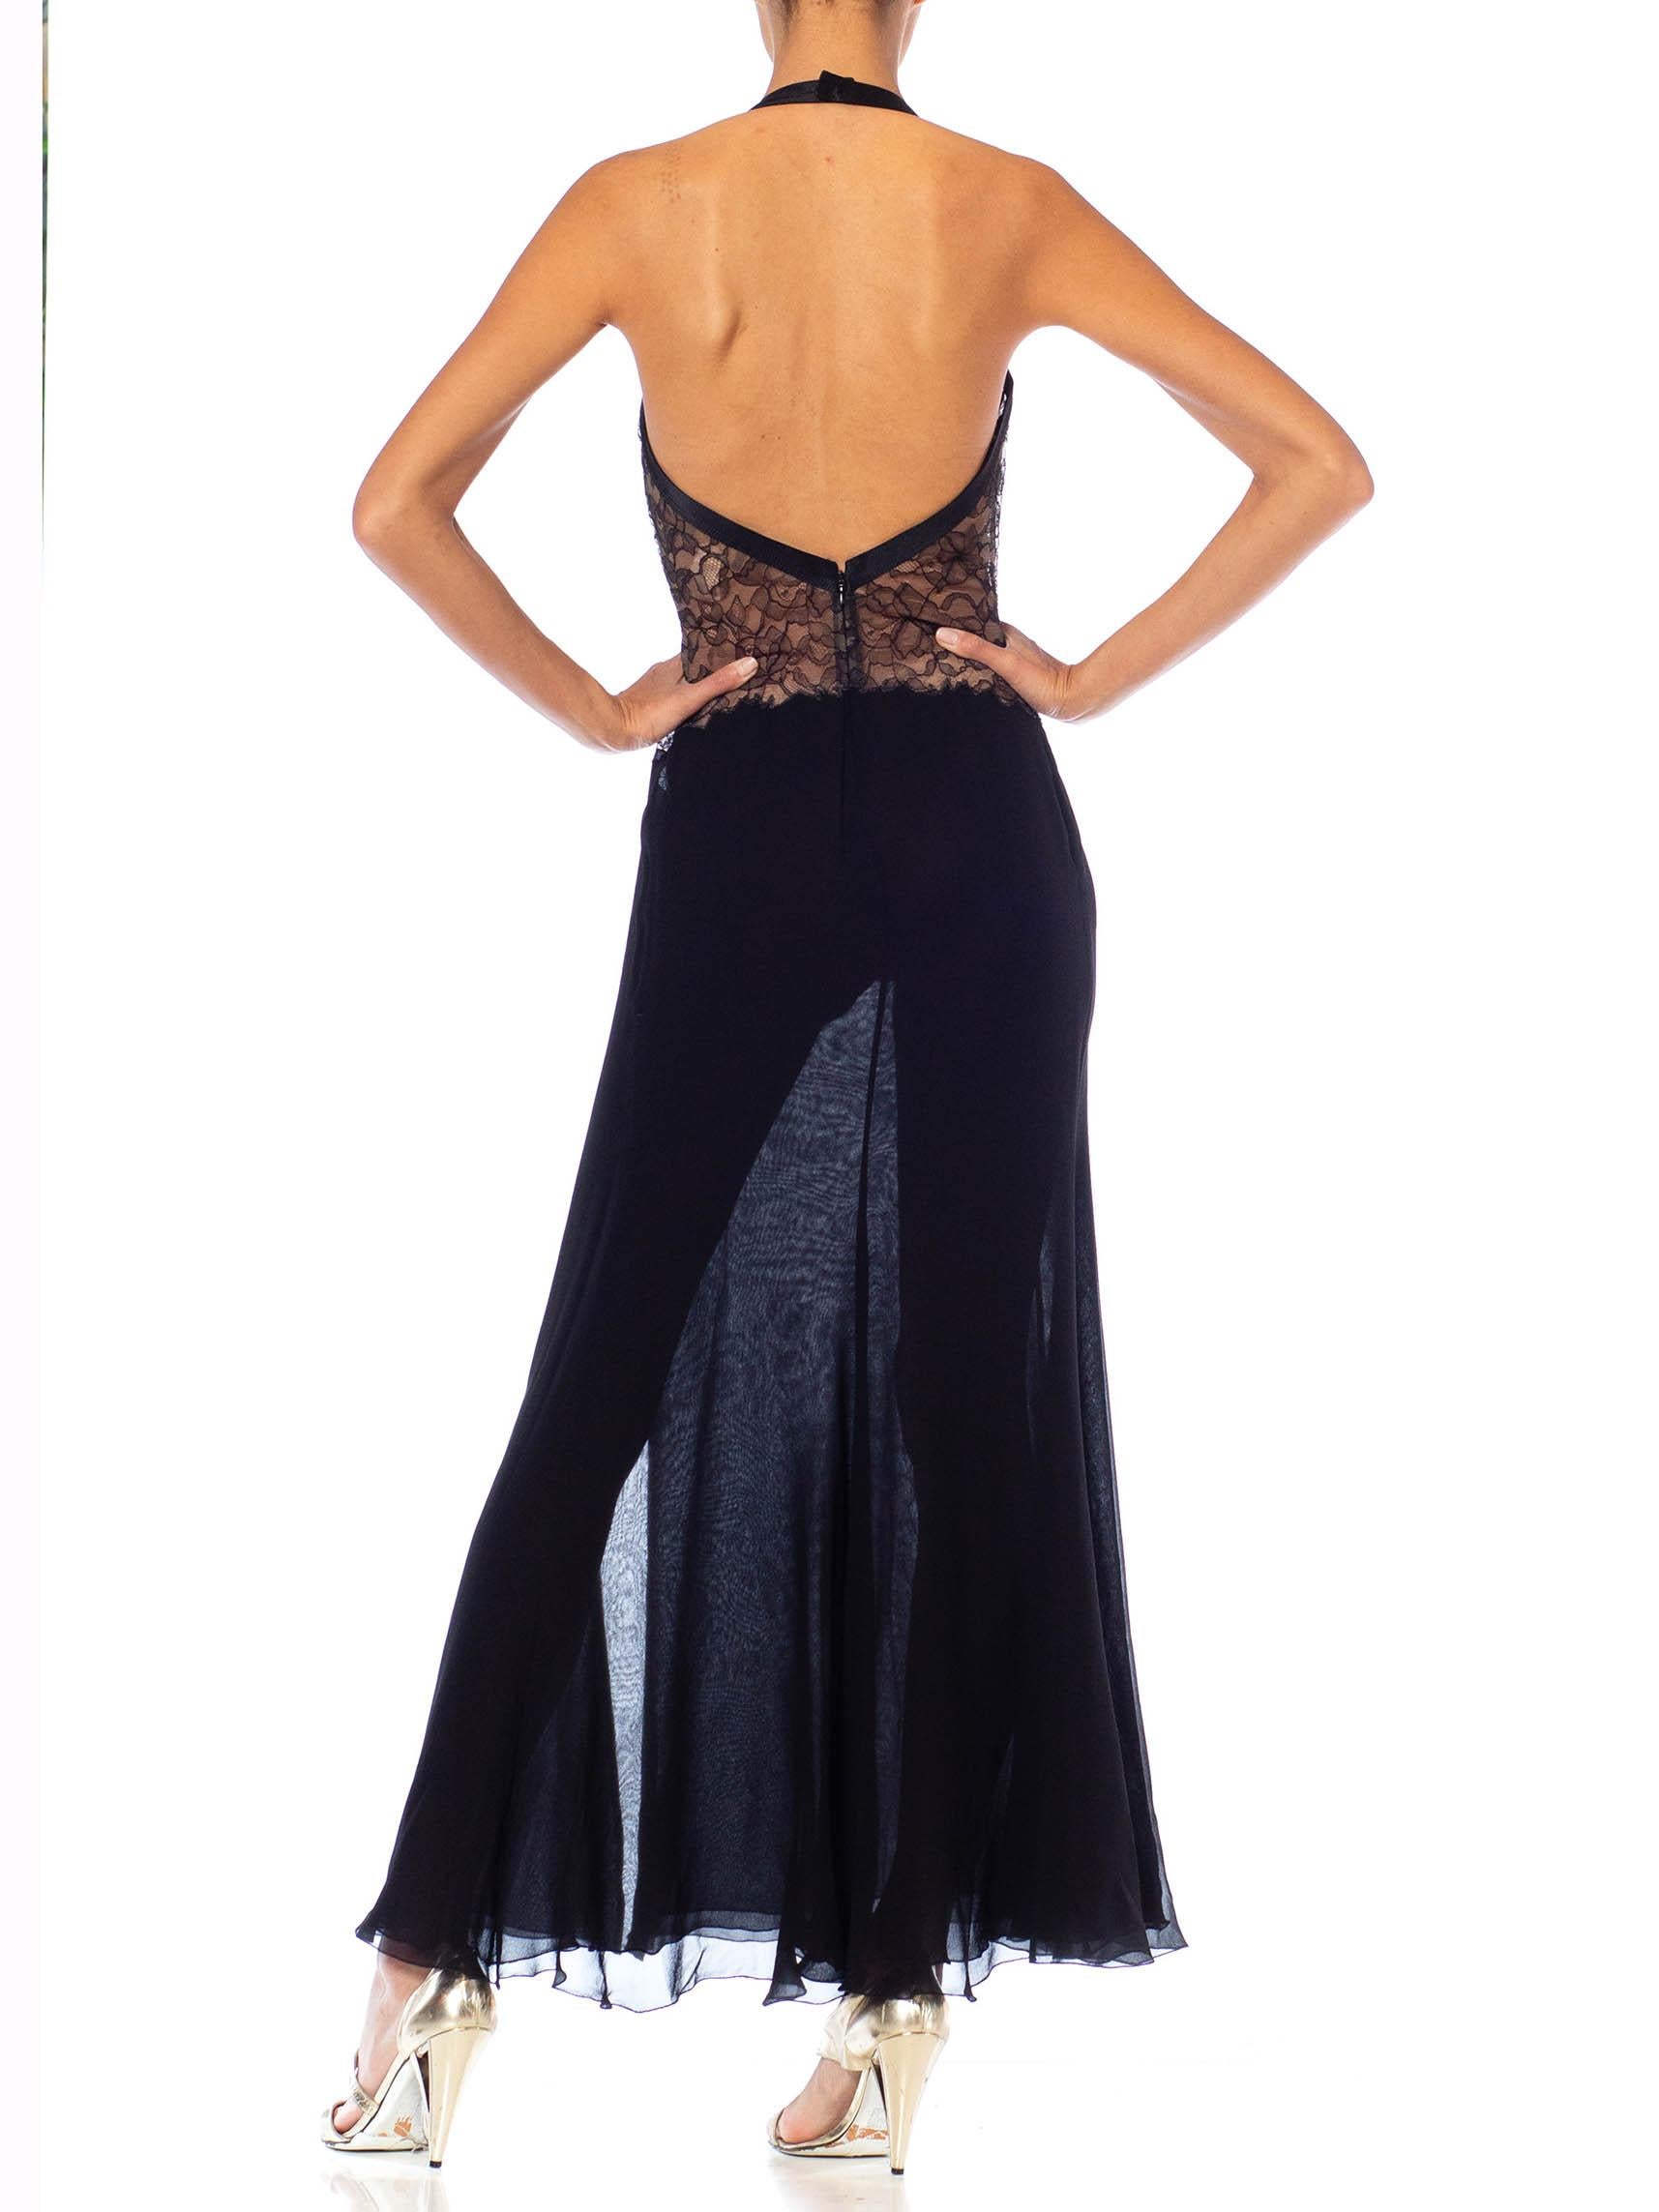 Women's 1990S Gianni Versace Black Silk Chiffon & Lace Lingerie Gown With High Slit